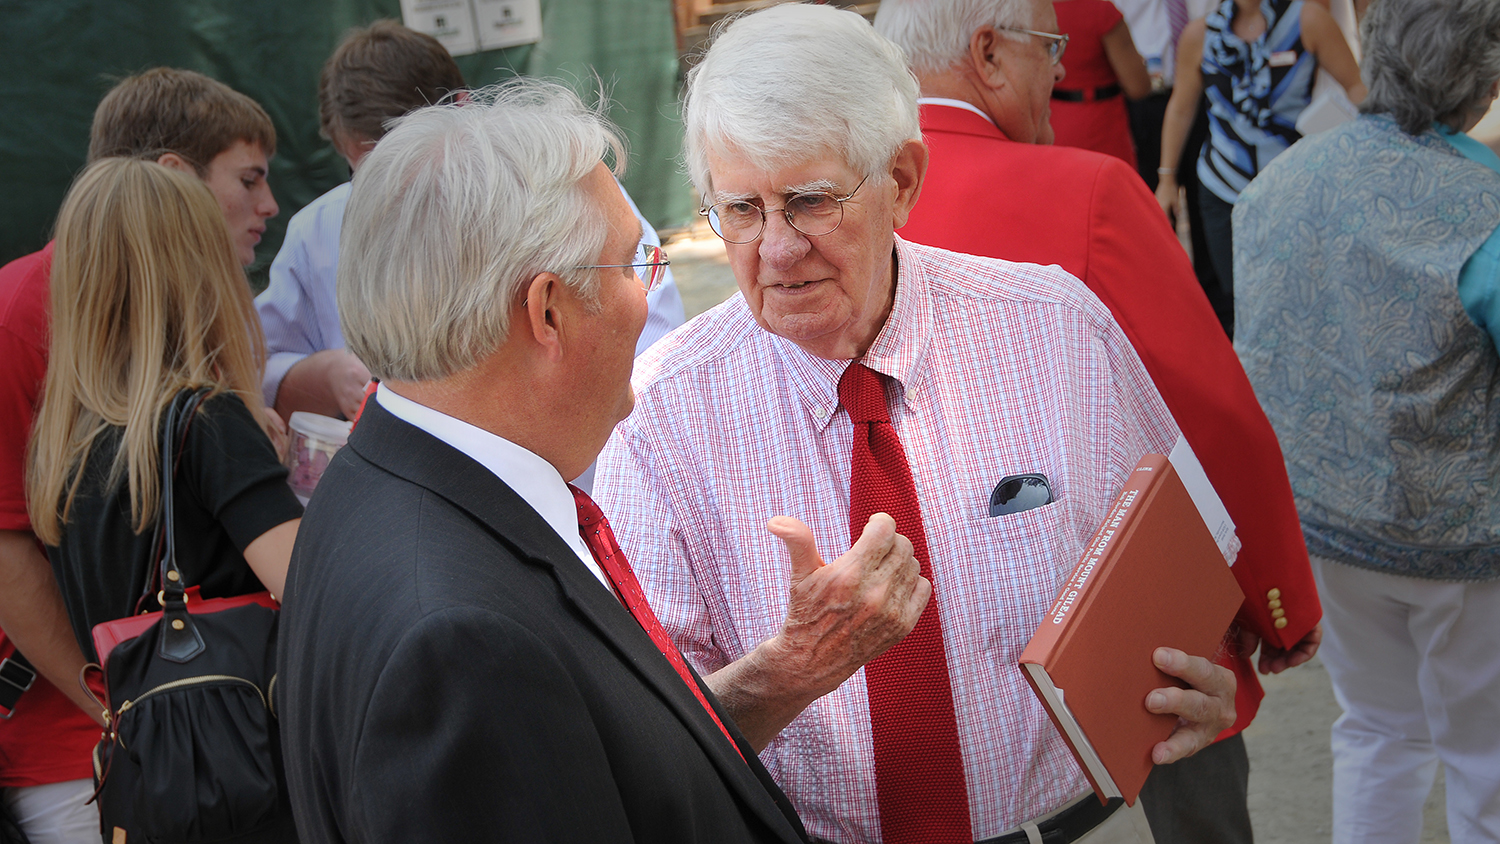 Chancellor Randy Woodson (left) and Vice Chancellor of Student Affairs Emeritus, Dr. Banks C. Talley, Jr. (for whom Talley Student is named) talk following the groundbreaking ceremony.